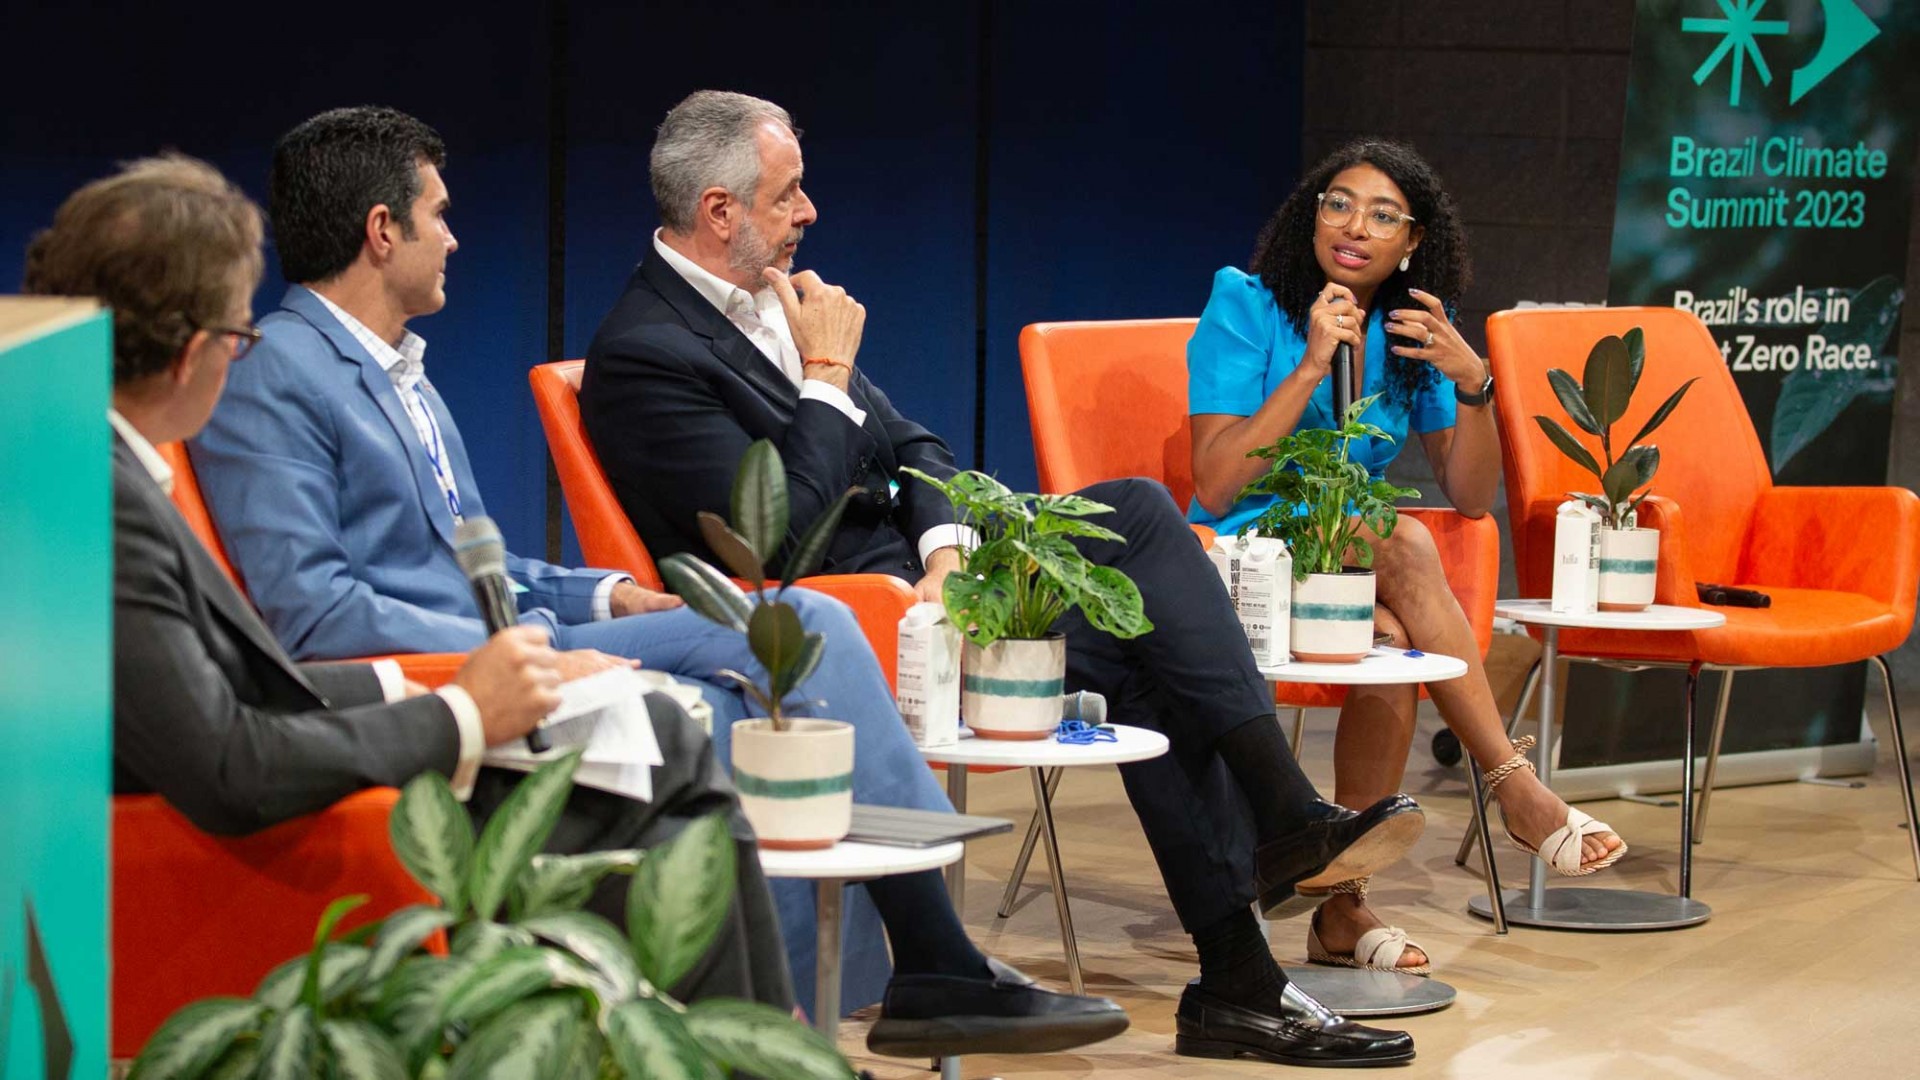 Discussants at Brazil Climate Summit 2023